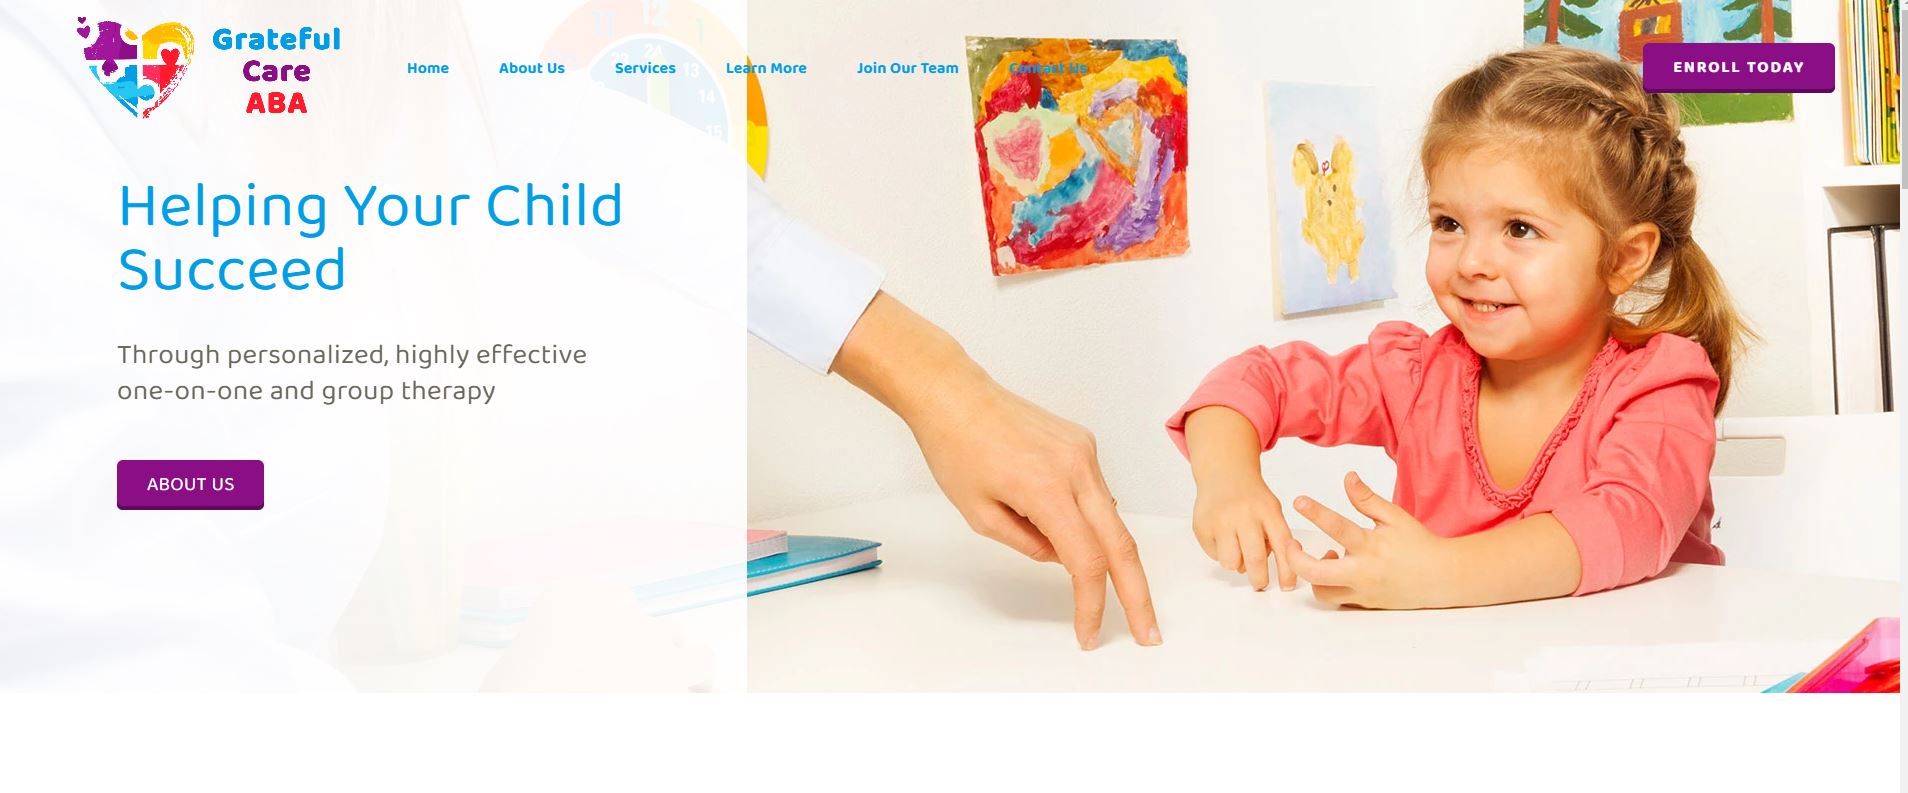 The image shows a website screenshot with a background that includes an adult and a child, possibly in a family setting. The website has a header with the text  ABA  and a navigation bar. Below the header is a section titled  Helping your child succeed,  followed by a subtitle stating  Through personalized effective coaching.  There is a photo of a young girl interacting with an adult, who appears to be a coach or therapist. The website features a call-to-action button that reads  Learn more about ABA.